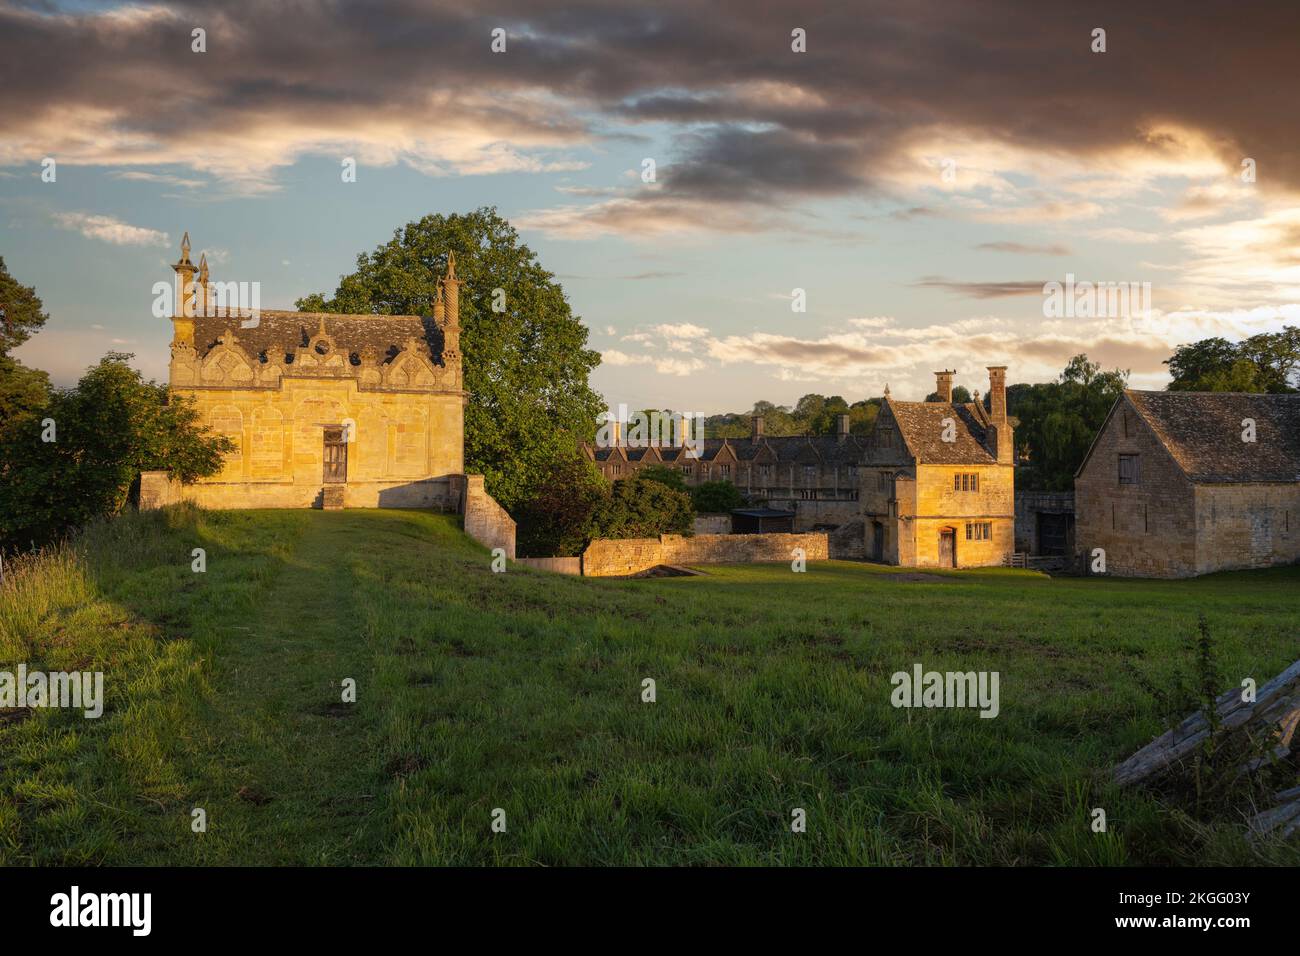 The old Banqueting Hall and Almshouses at Chipping Campden, Cotswolds, Gloucestershire, England. Stock Photo